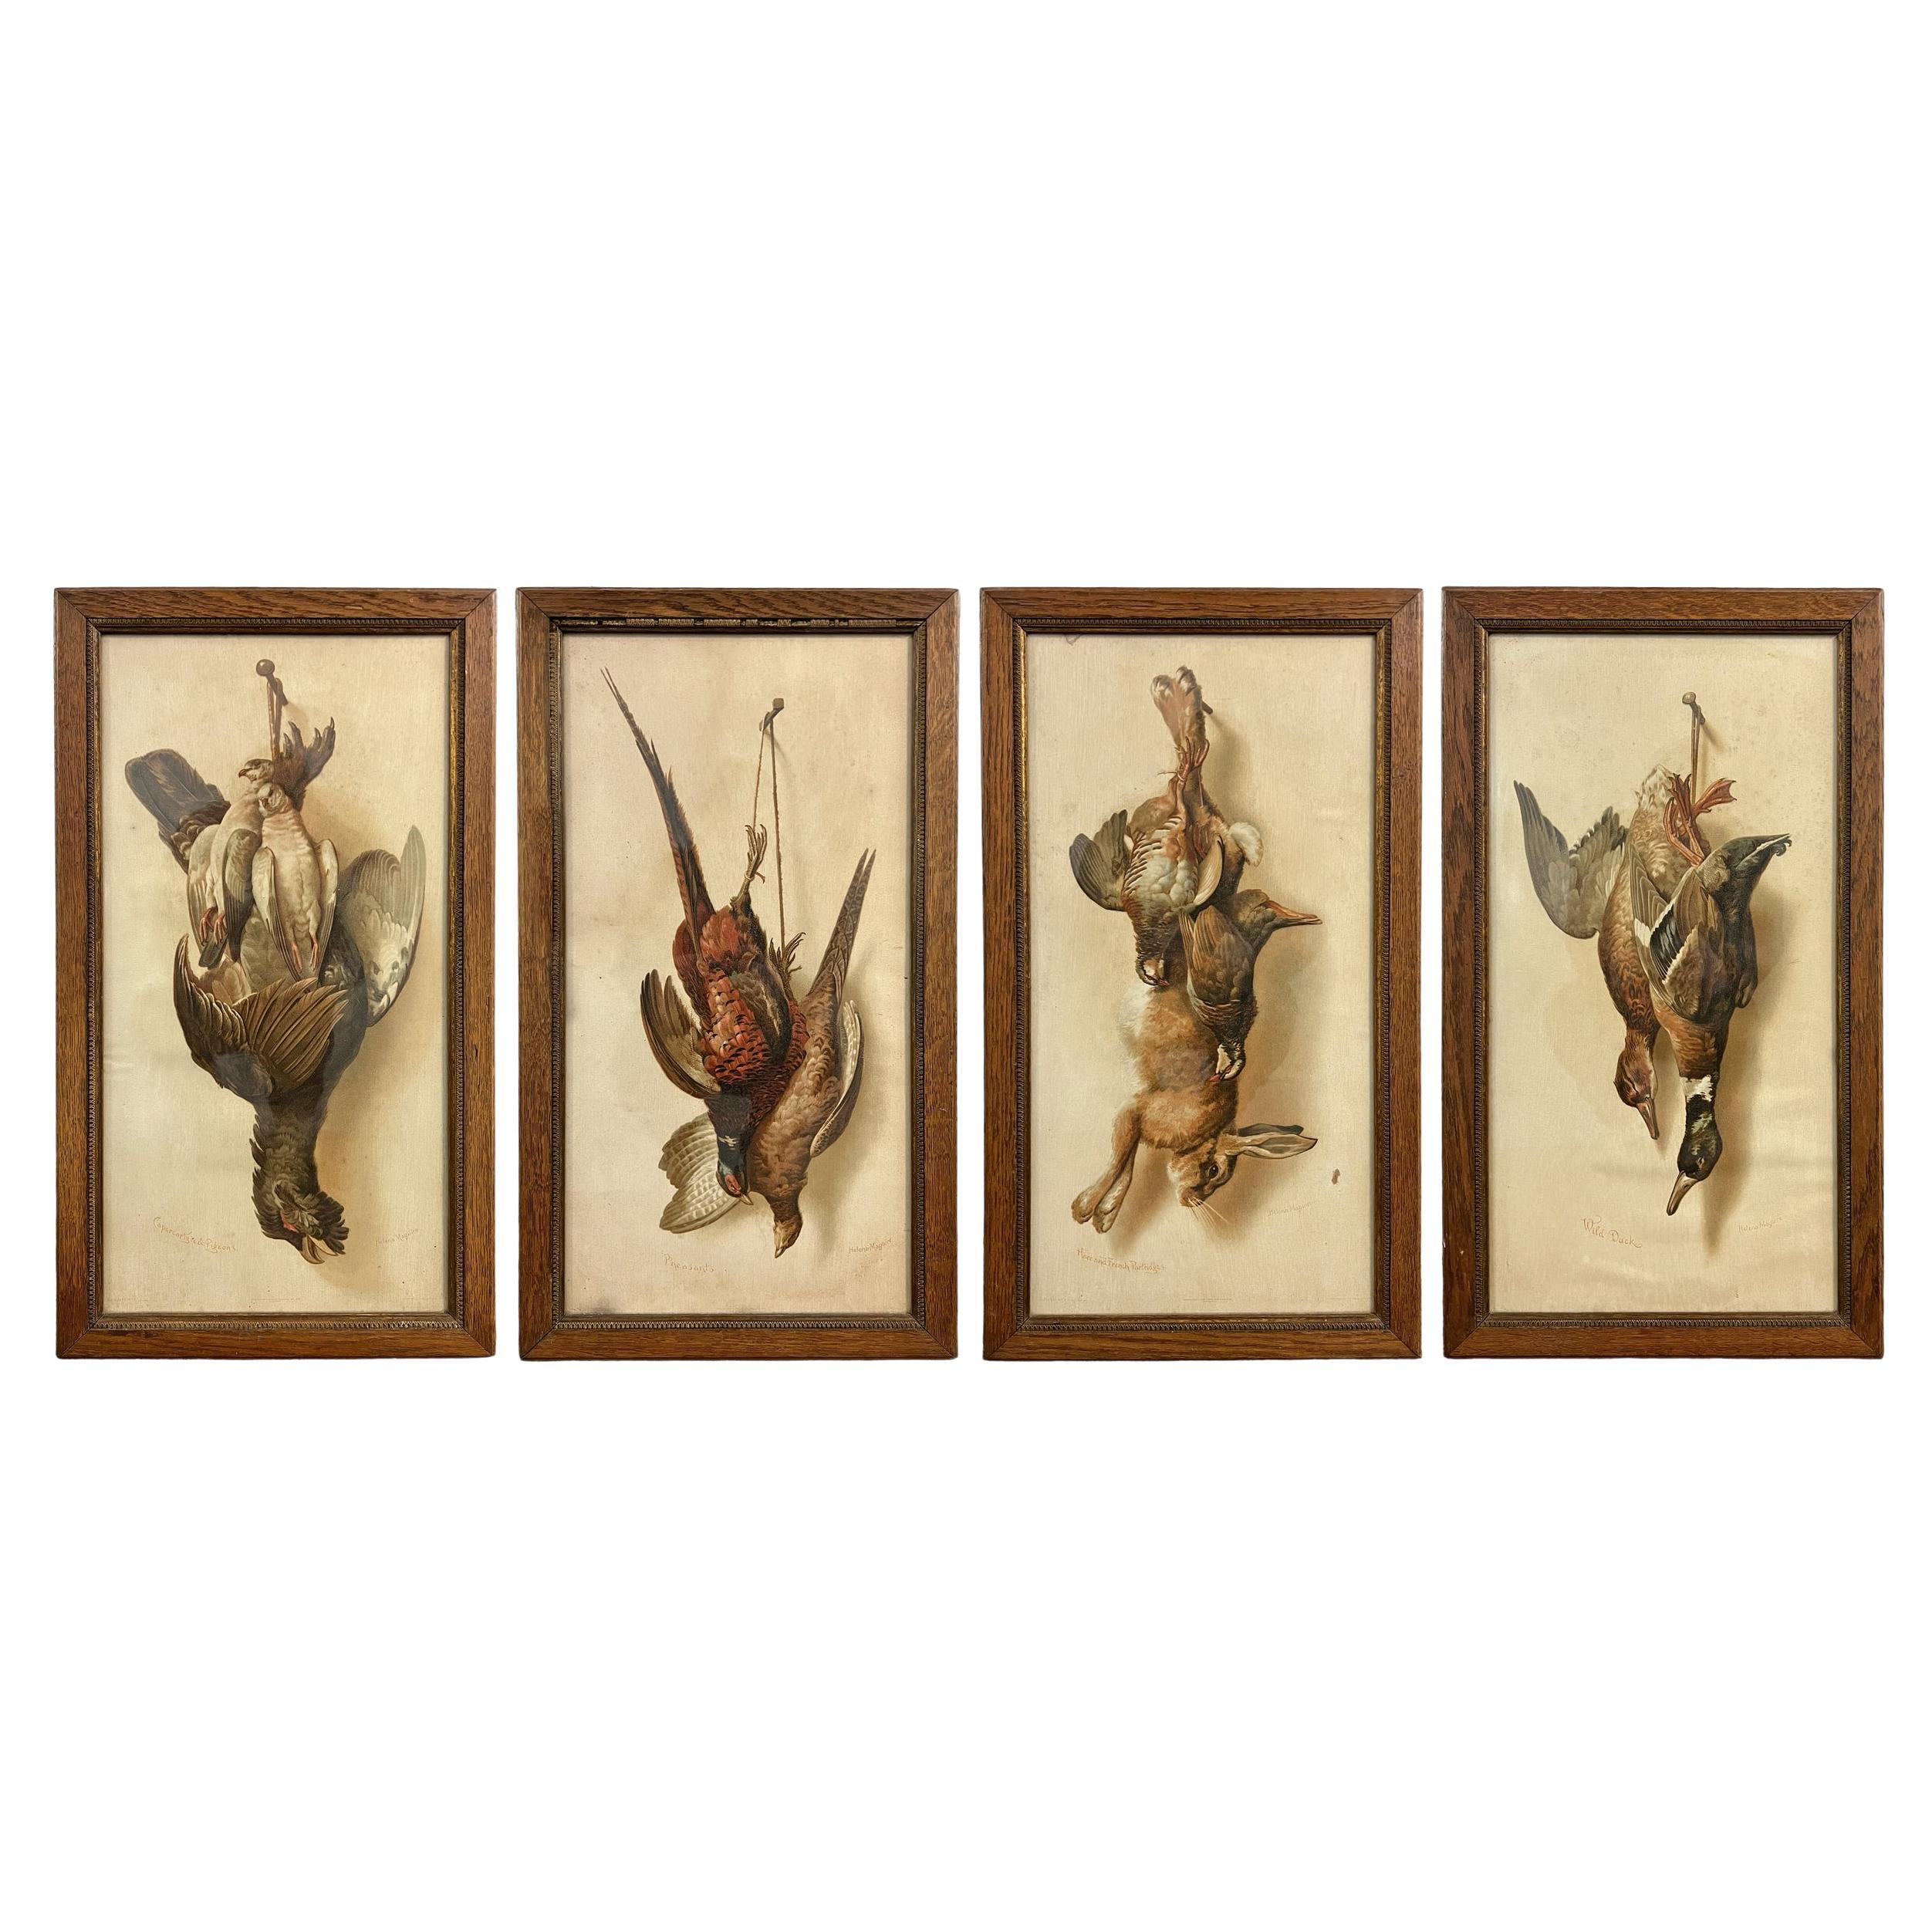 Set of Four 19th Century English Hunt Trophy Lithographs